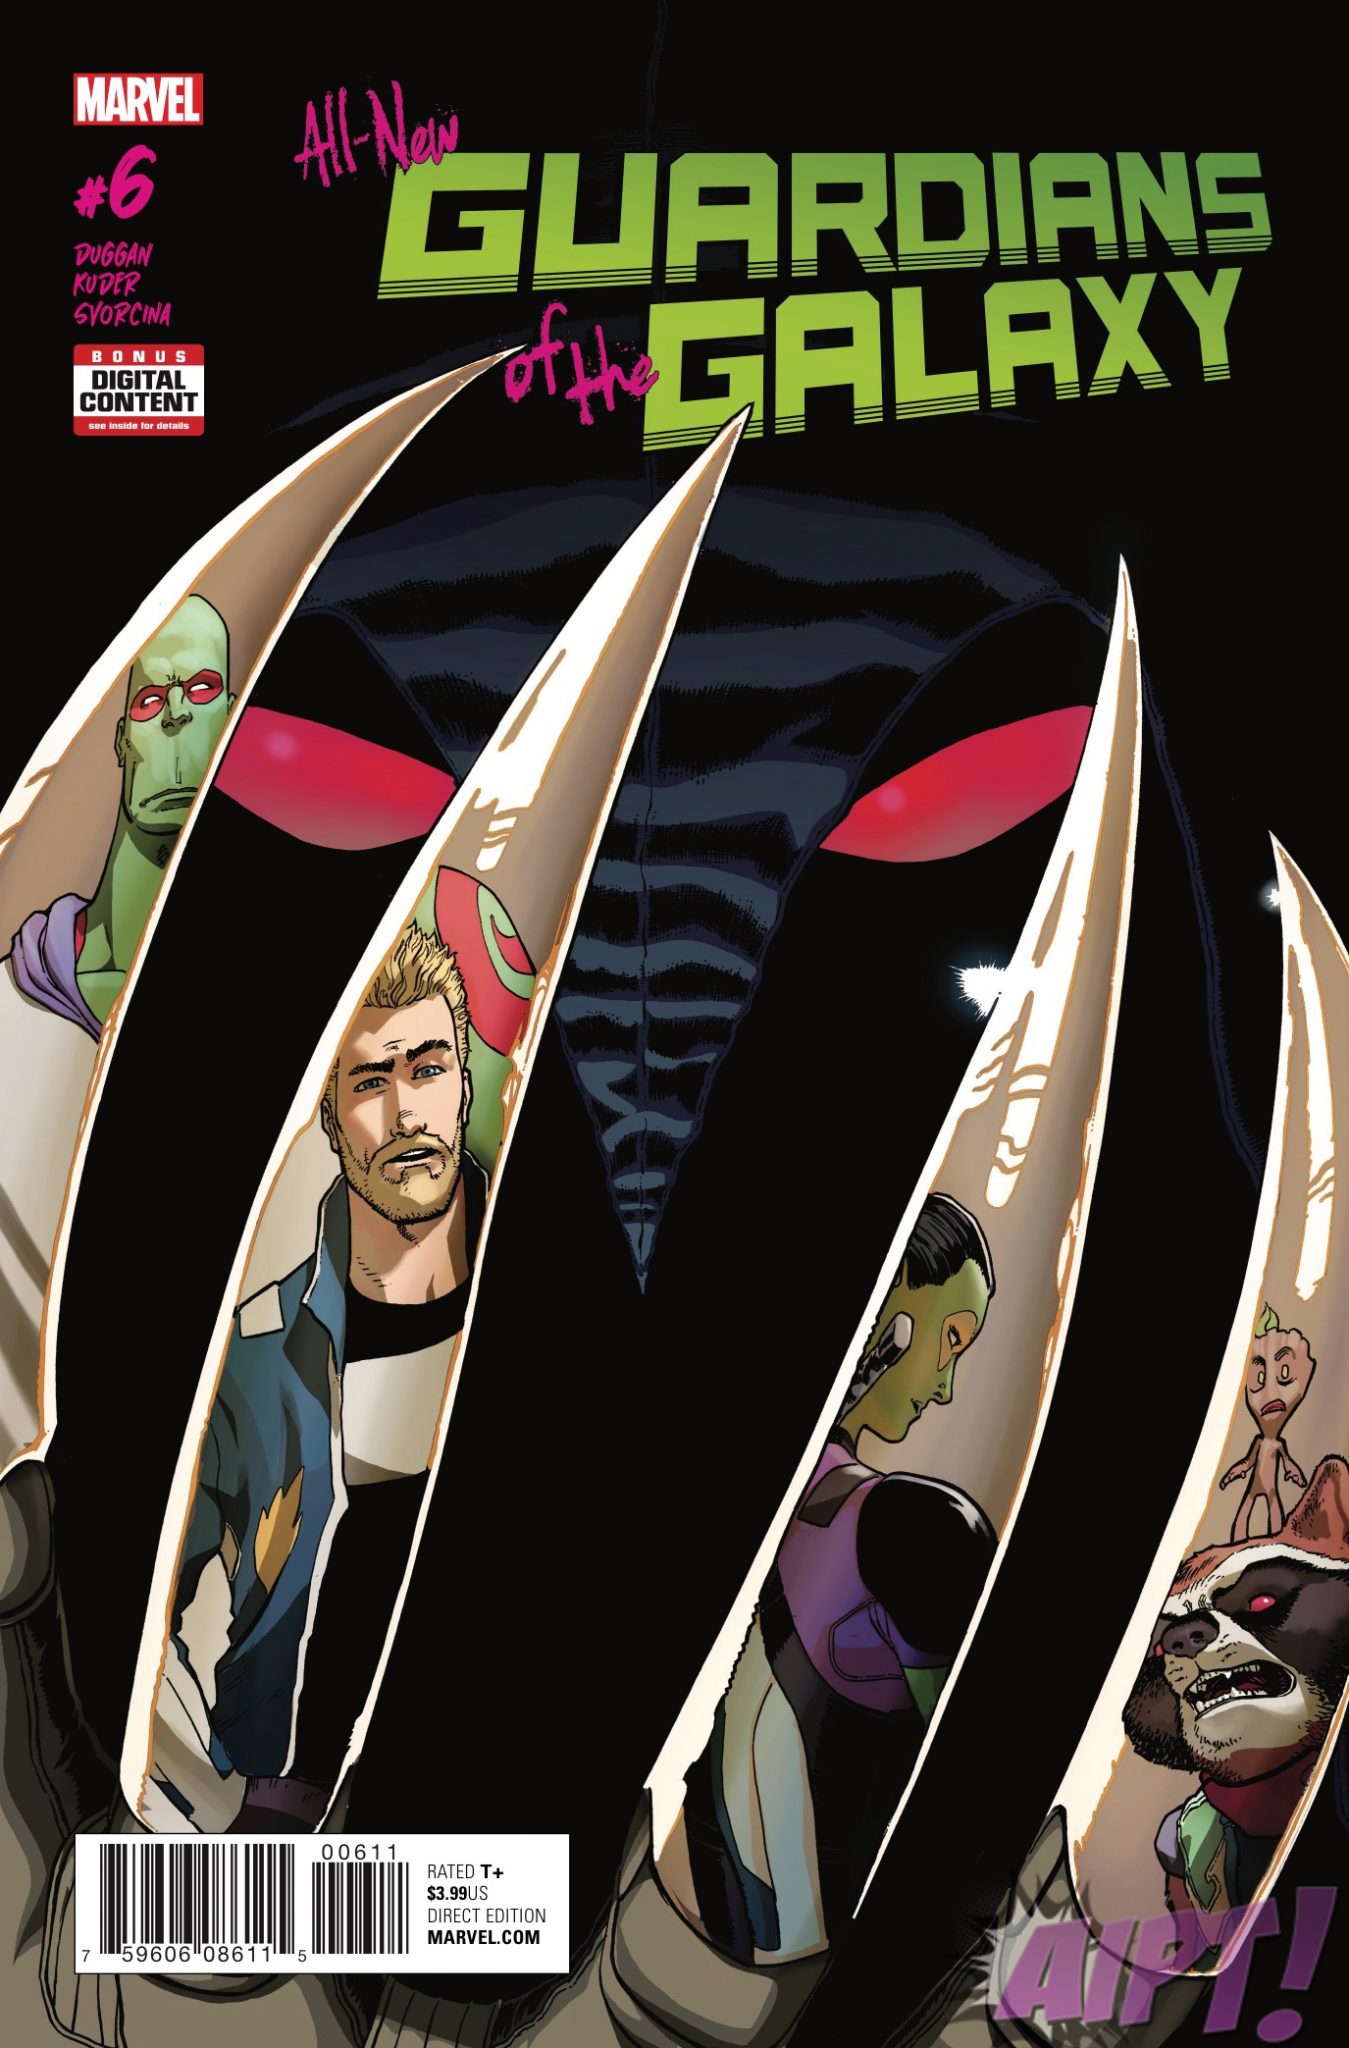 [EXCLUSIVE] Marvel Preview: All-New Guardians of the Galaxy #6